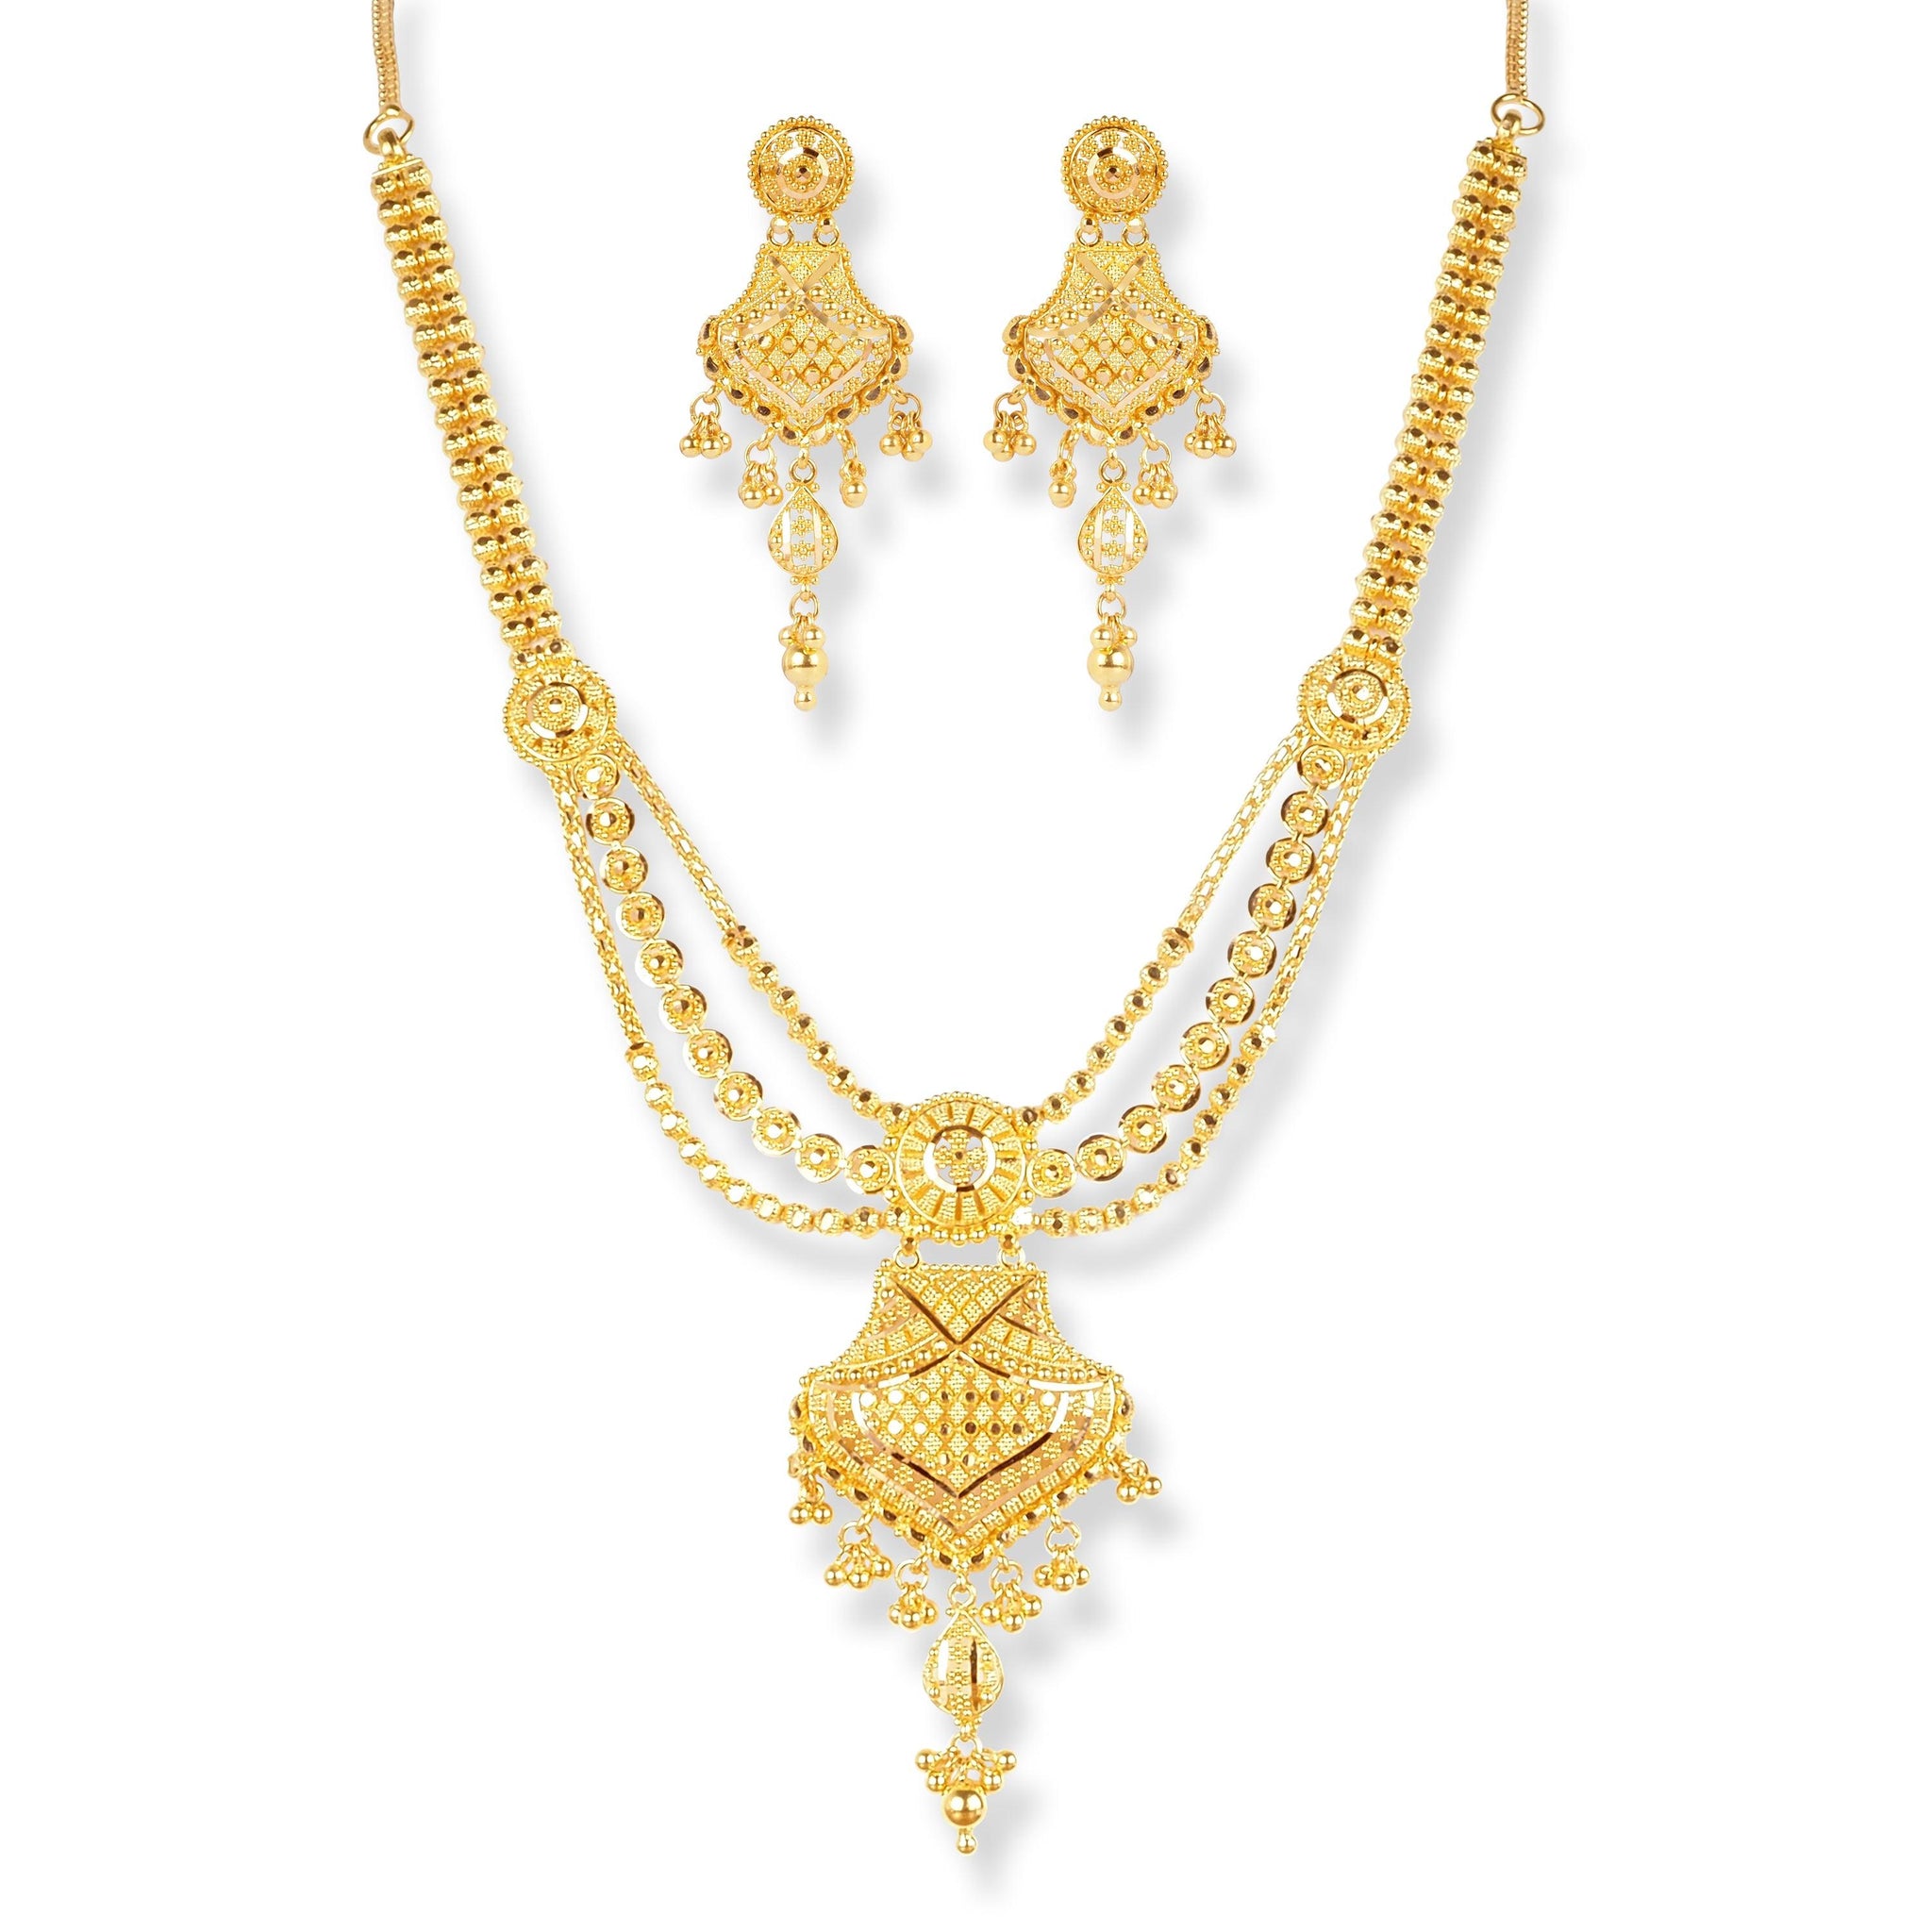 22ct Gold Set with Filigree Work (Necklace + Earrings) NE-7876